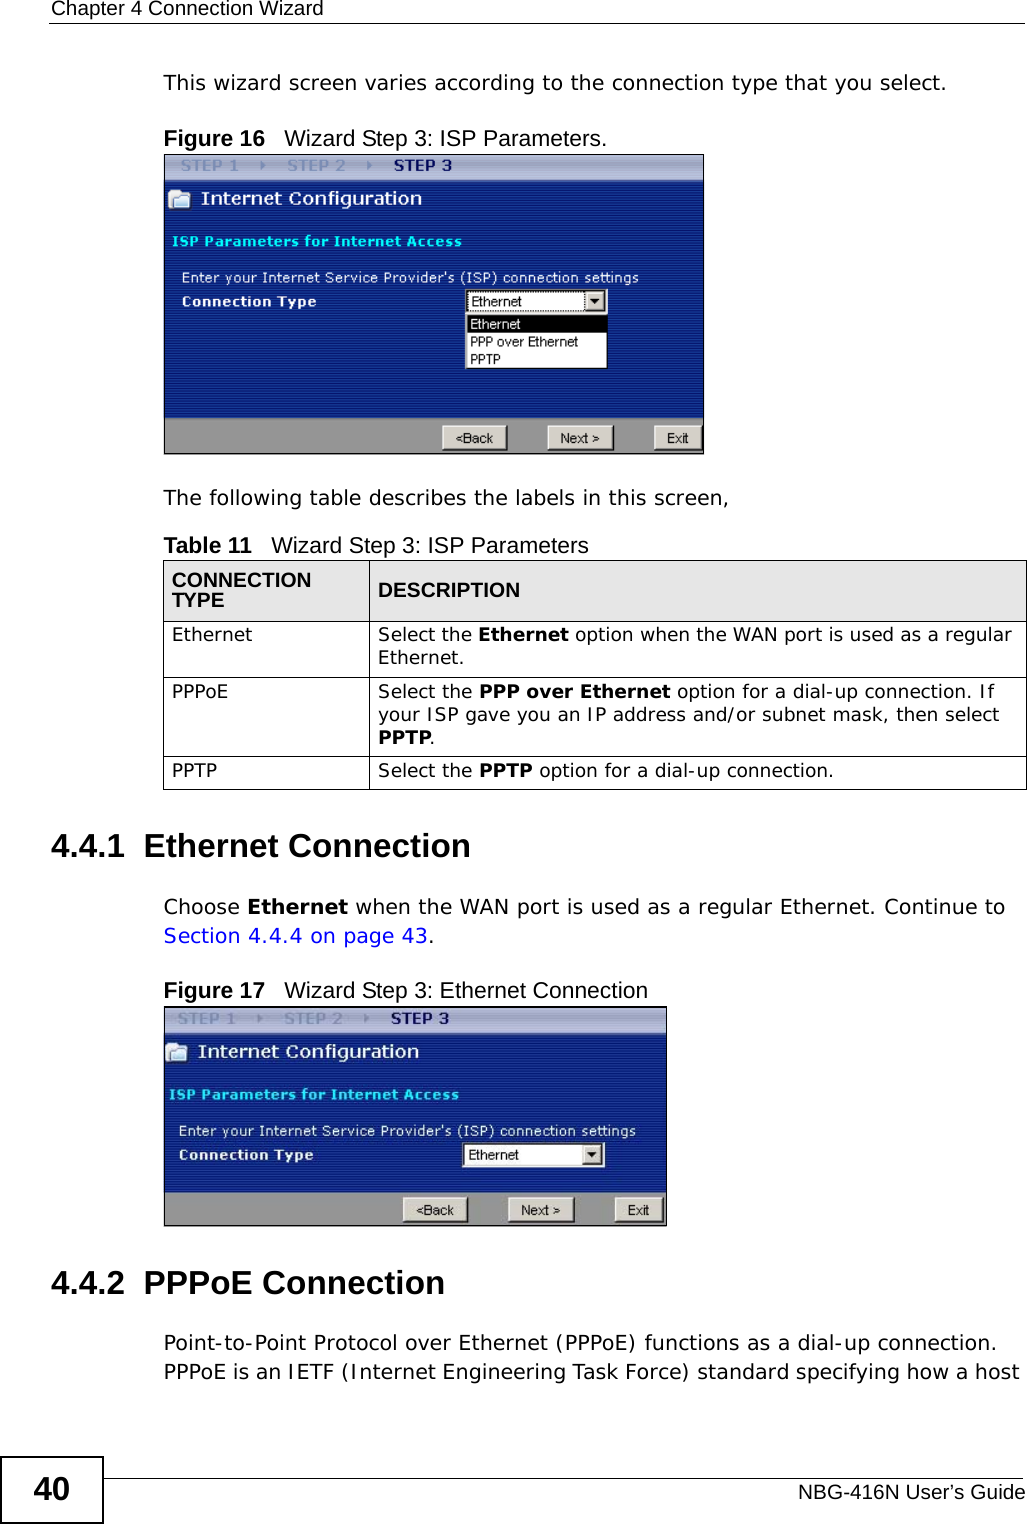 Chapter 4 Connection WizardNBG-416N User’s Guide40This wizard screen varies according to the connection type that you select.Figure 16   Wizard Step 3: ISP Parameters.The following table describes the labels in this screen,4.4.1  Ethernet ConnectionChoose Ethernet when the WAN port is used as a regular Ethernet. Continue to Section 4.4.4 on page 43.Figure 17   Wizard Step 3: Ethernet Connection4.4.2  PPPoE ConnectionPoint-to-Point Protocol over Ethernet (PPPoE) functions as a dial-up connection. PPPoE is an IETF (Internet Engineering Task Force) standard specifying how a host Table 11   Wizard Step 3: ISP ParametersCONNECTION TYPE DESCRIPTIONEthernet Select the Ethernet option when the WAN port is used as a regular Ethernet. PPPoE Select the PPP over Ethernet option for a dial-up connection. If your ISP gave you an IP address and/or subnet mask, then select PPTP.PPTP Select the PPTP option for a dial-up connection.